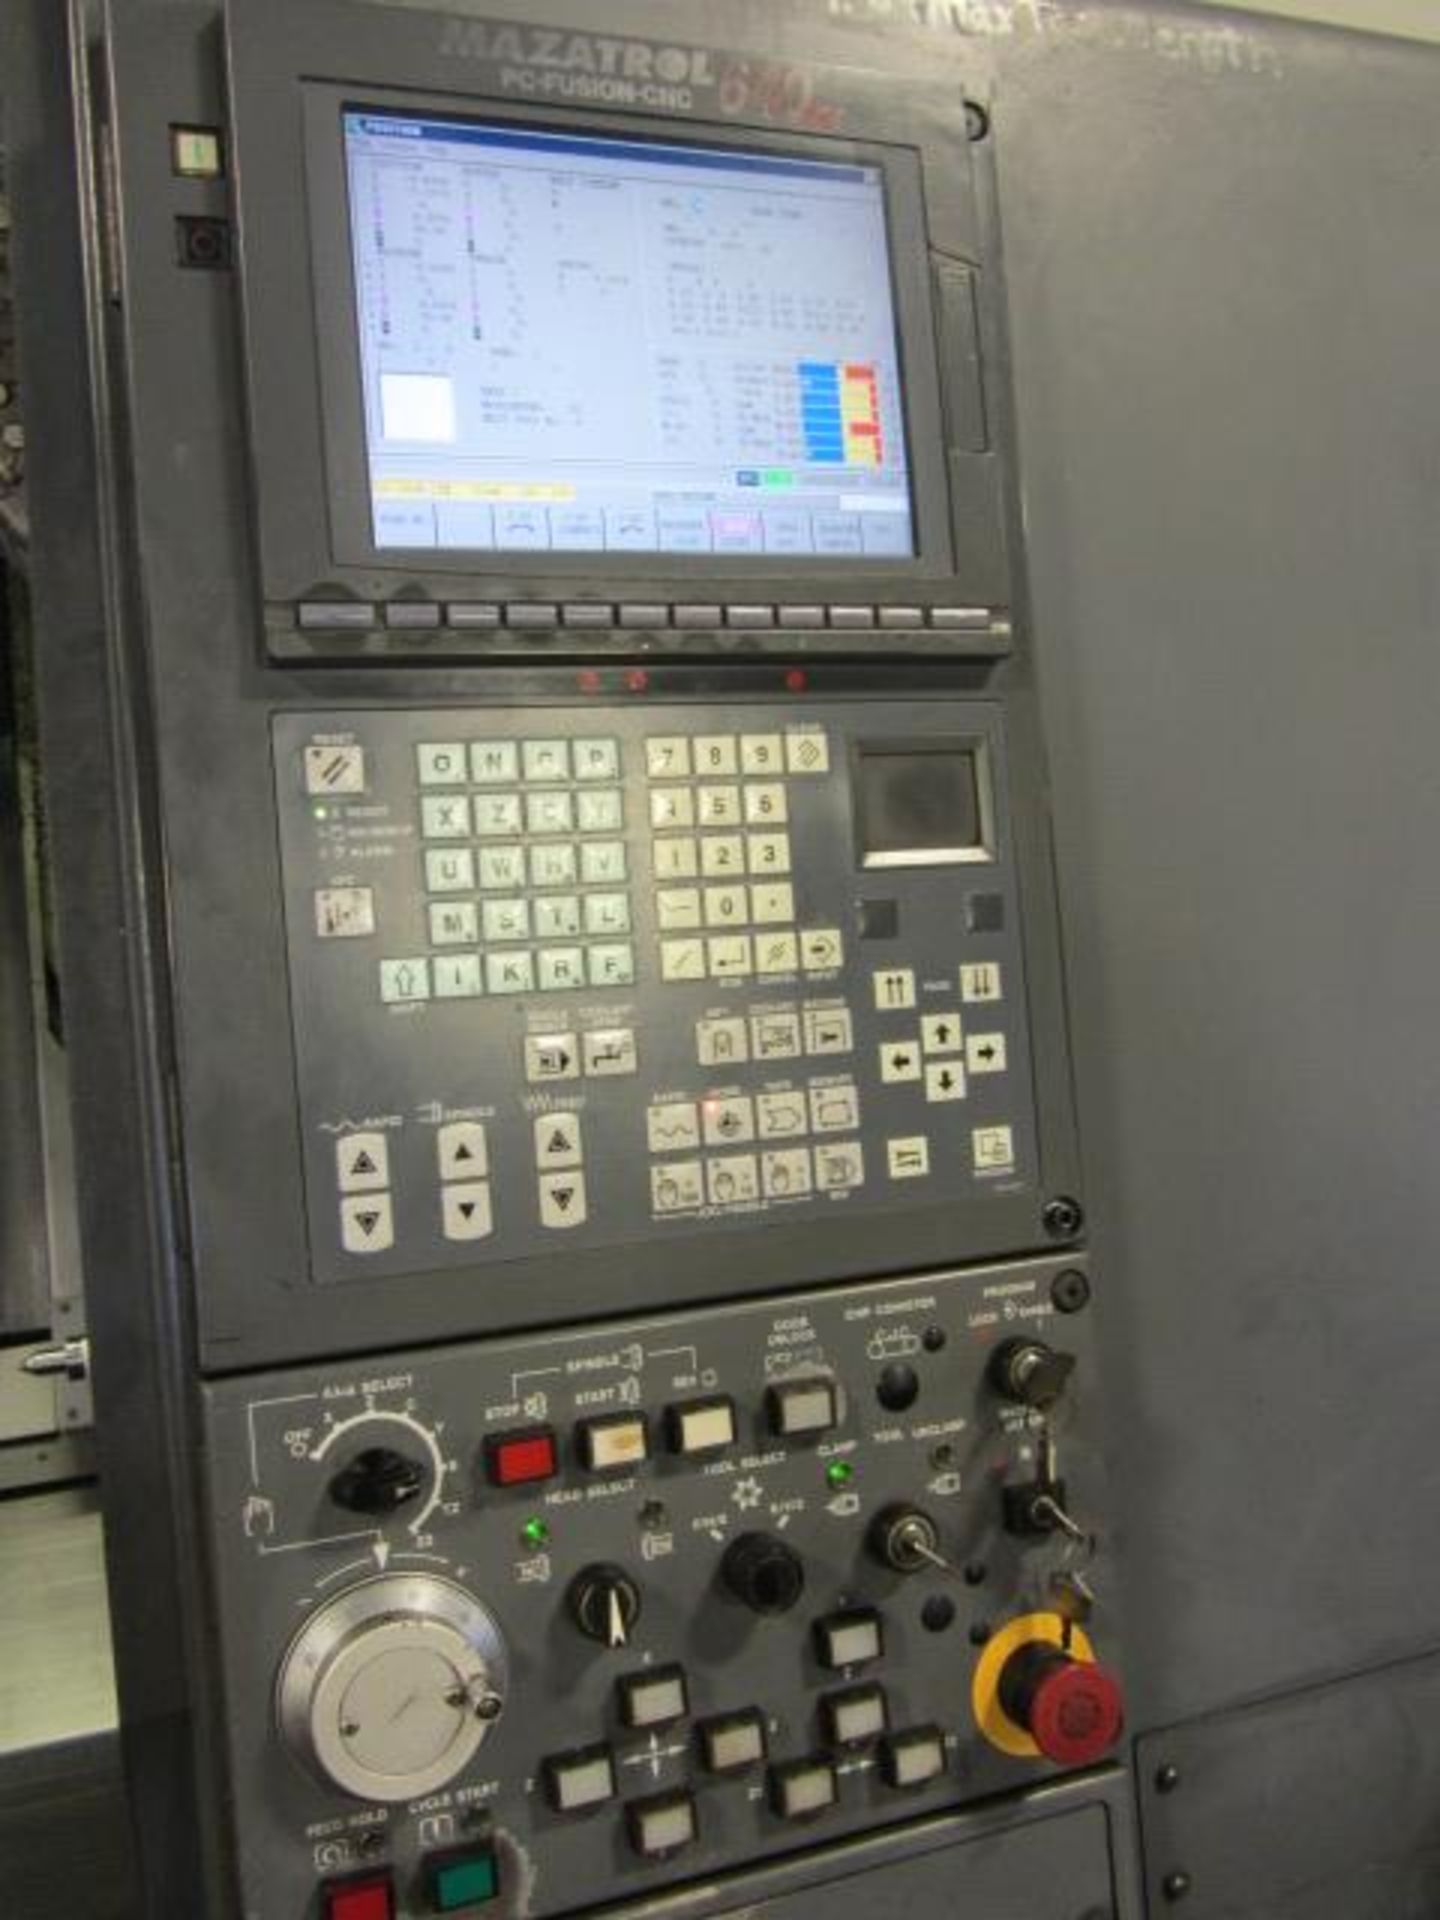 Mazak Integrex 200SY CNC Turning Center with Sub-Spindle, Milling & Y-Axis, 8'' Chuck on Main - Image 9 of 9